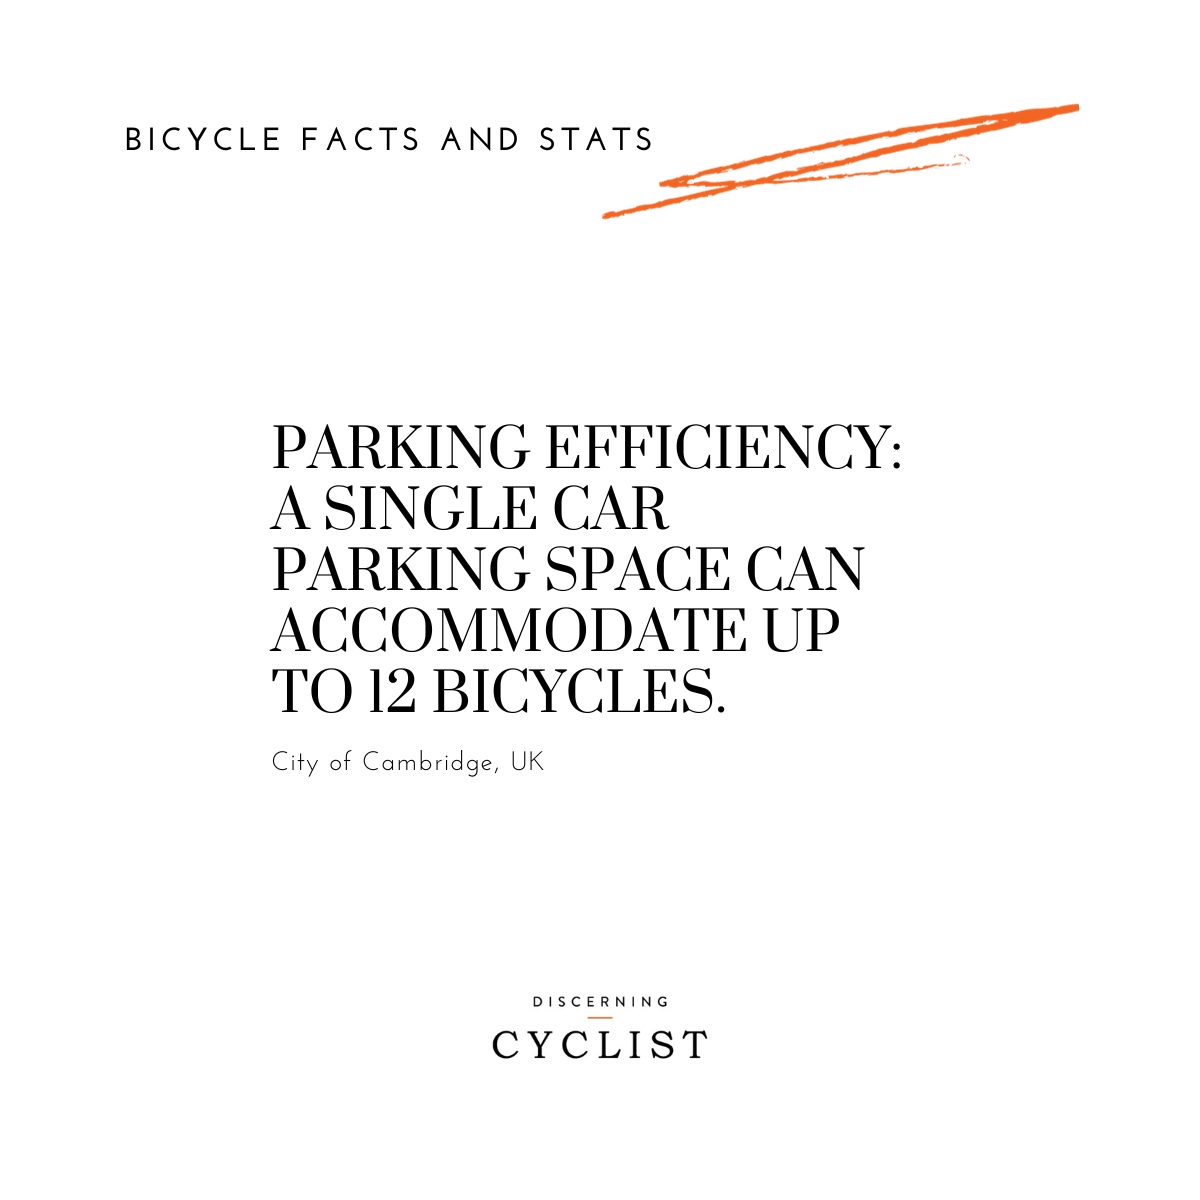 Parking Efficiency: A single car parking space can accommodate up to 12 bicycles.